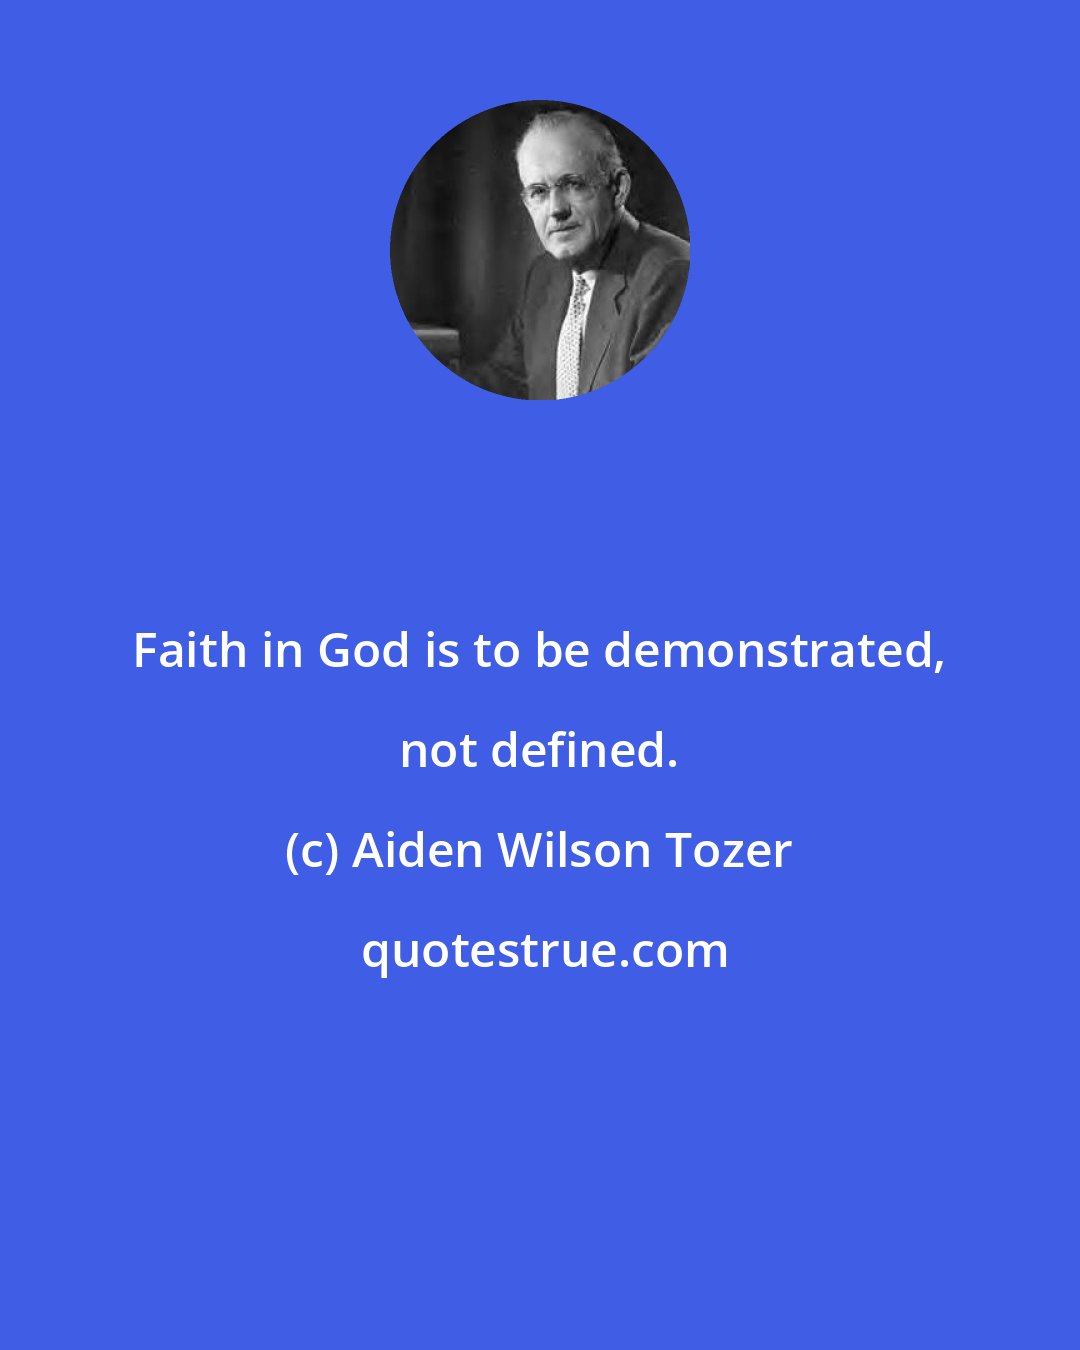 Aiden Wilson Tozer: Faith in God is to be demonstrated, not defined.